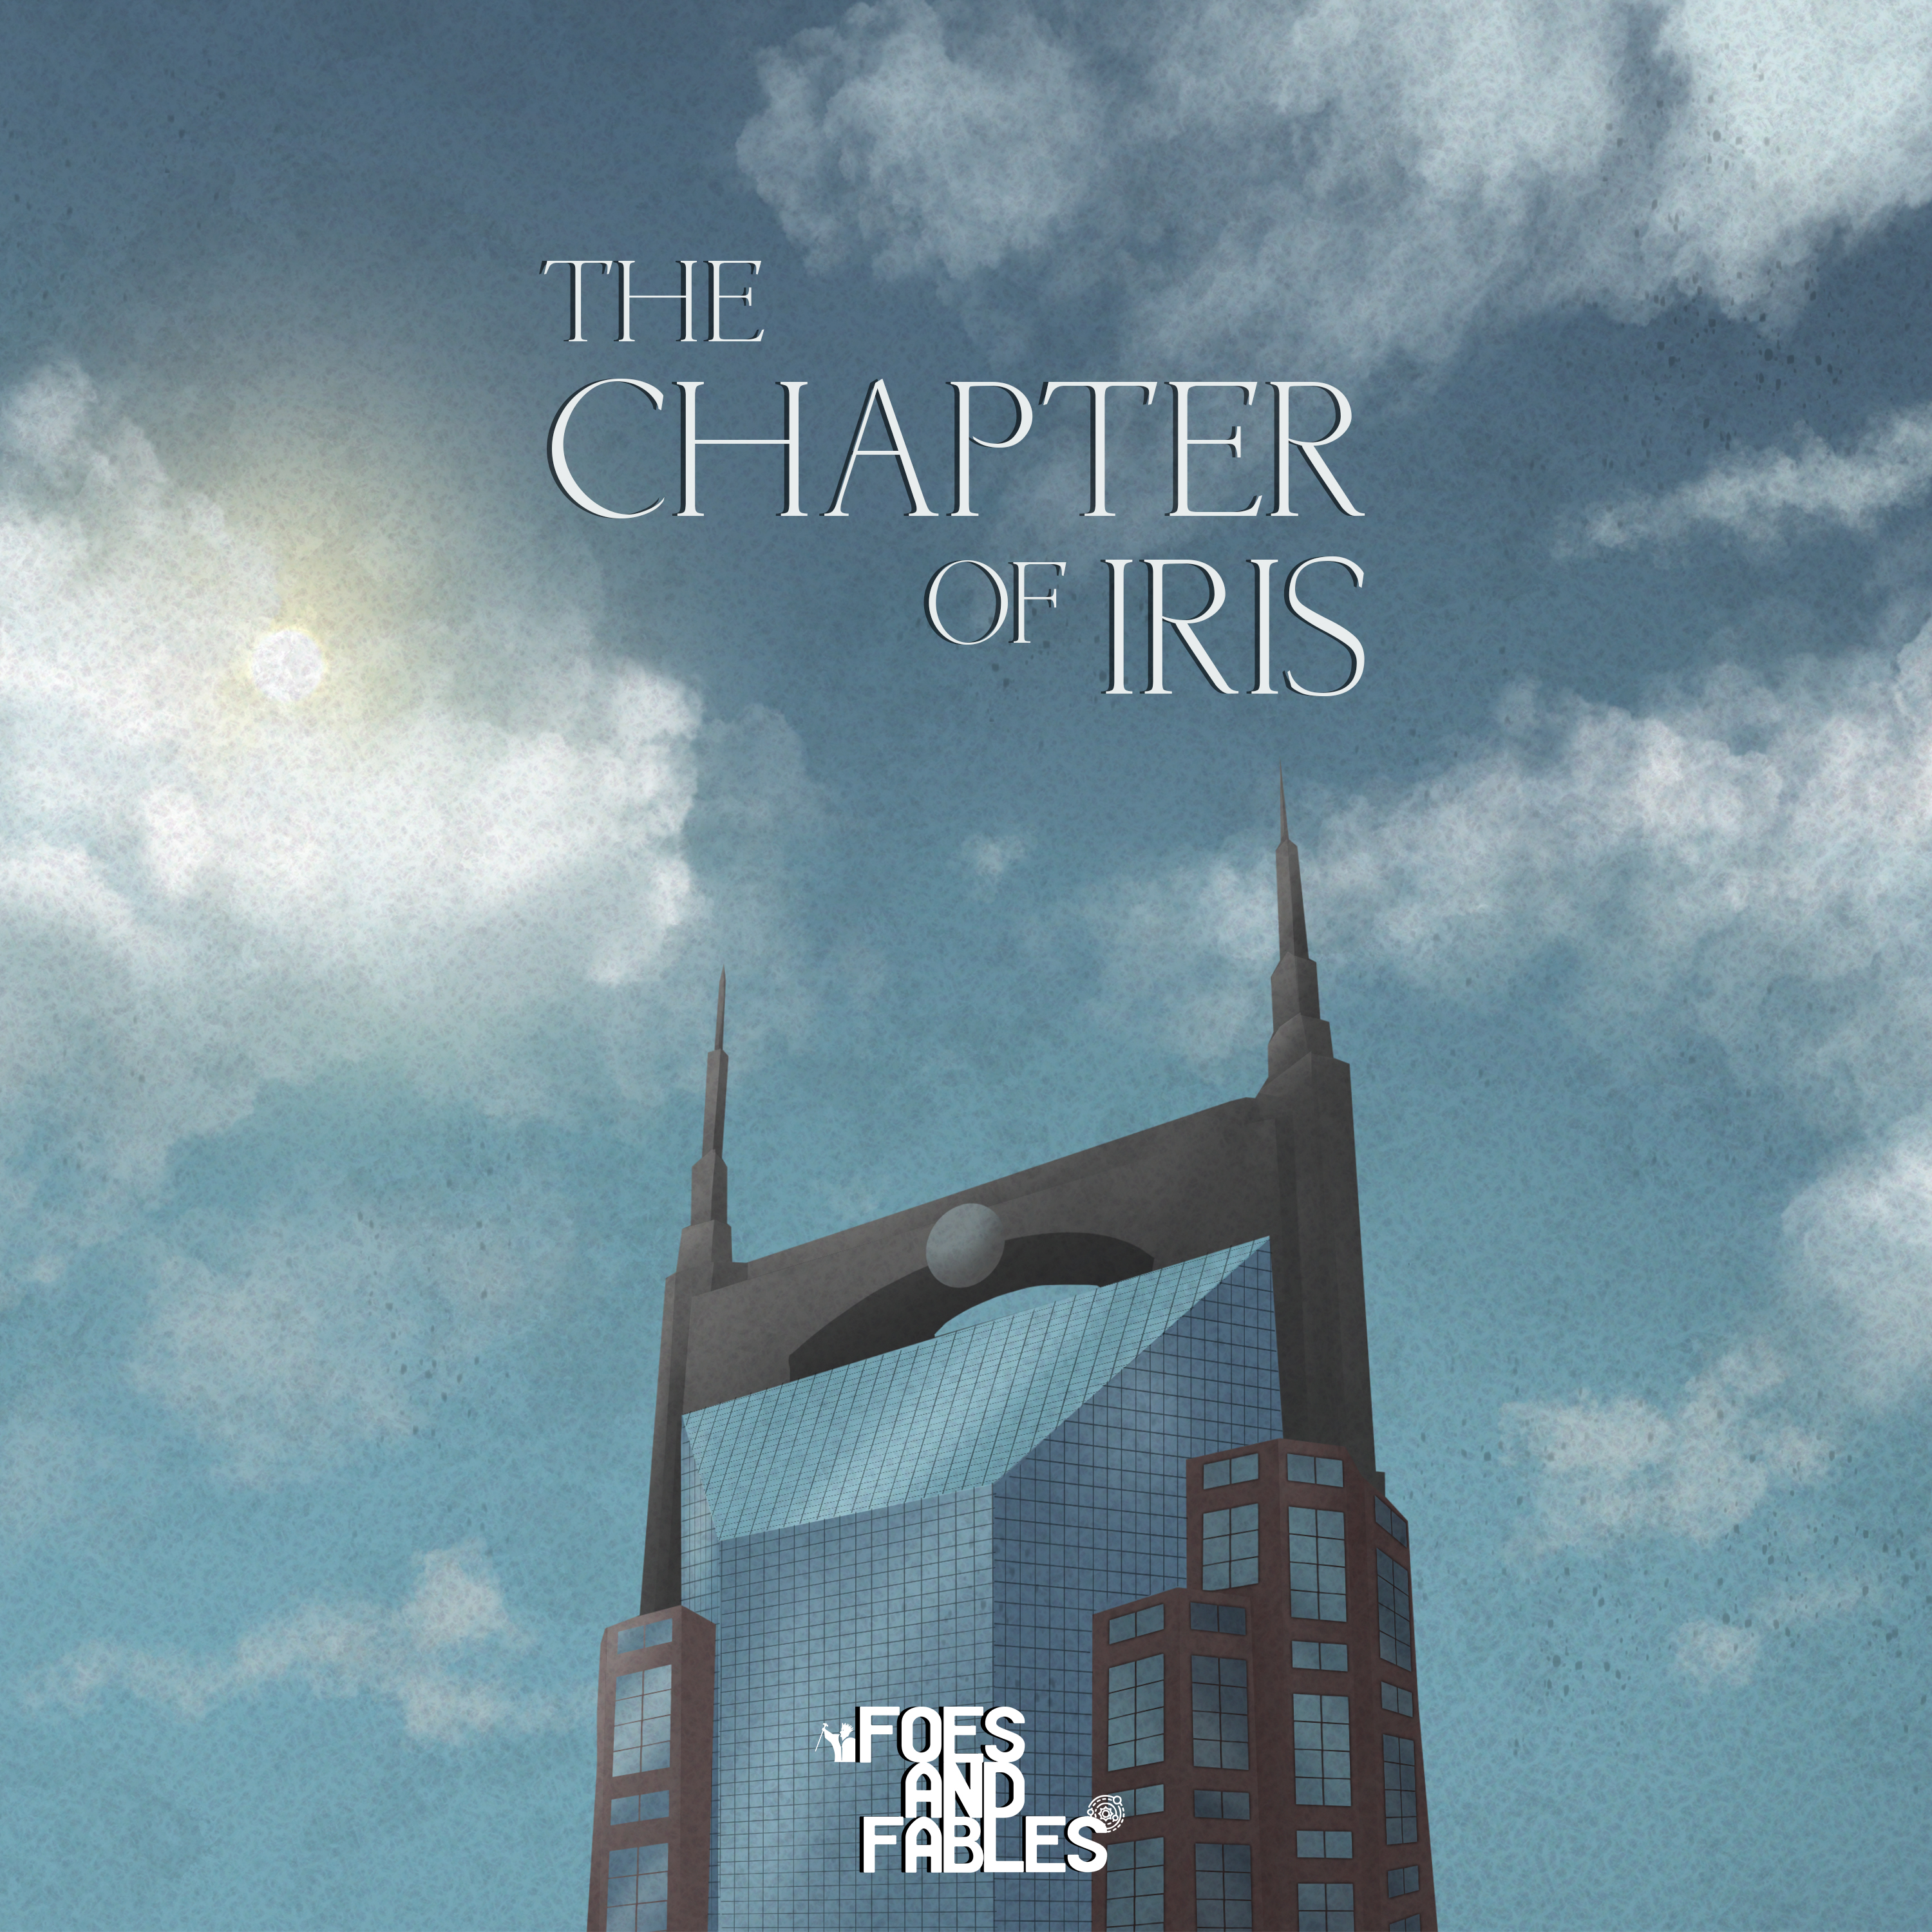 9. The Chapter of Evergreen | The Chapter of Iris